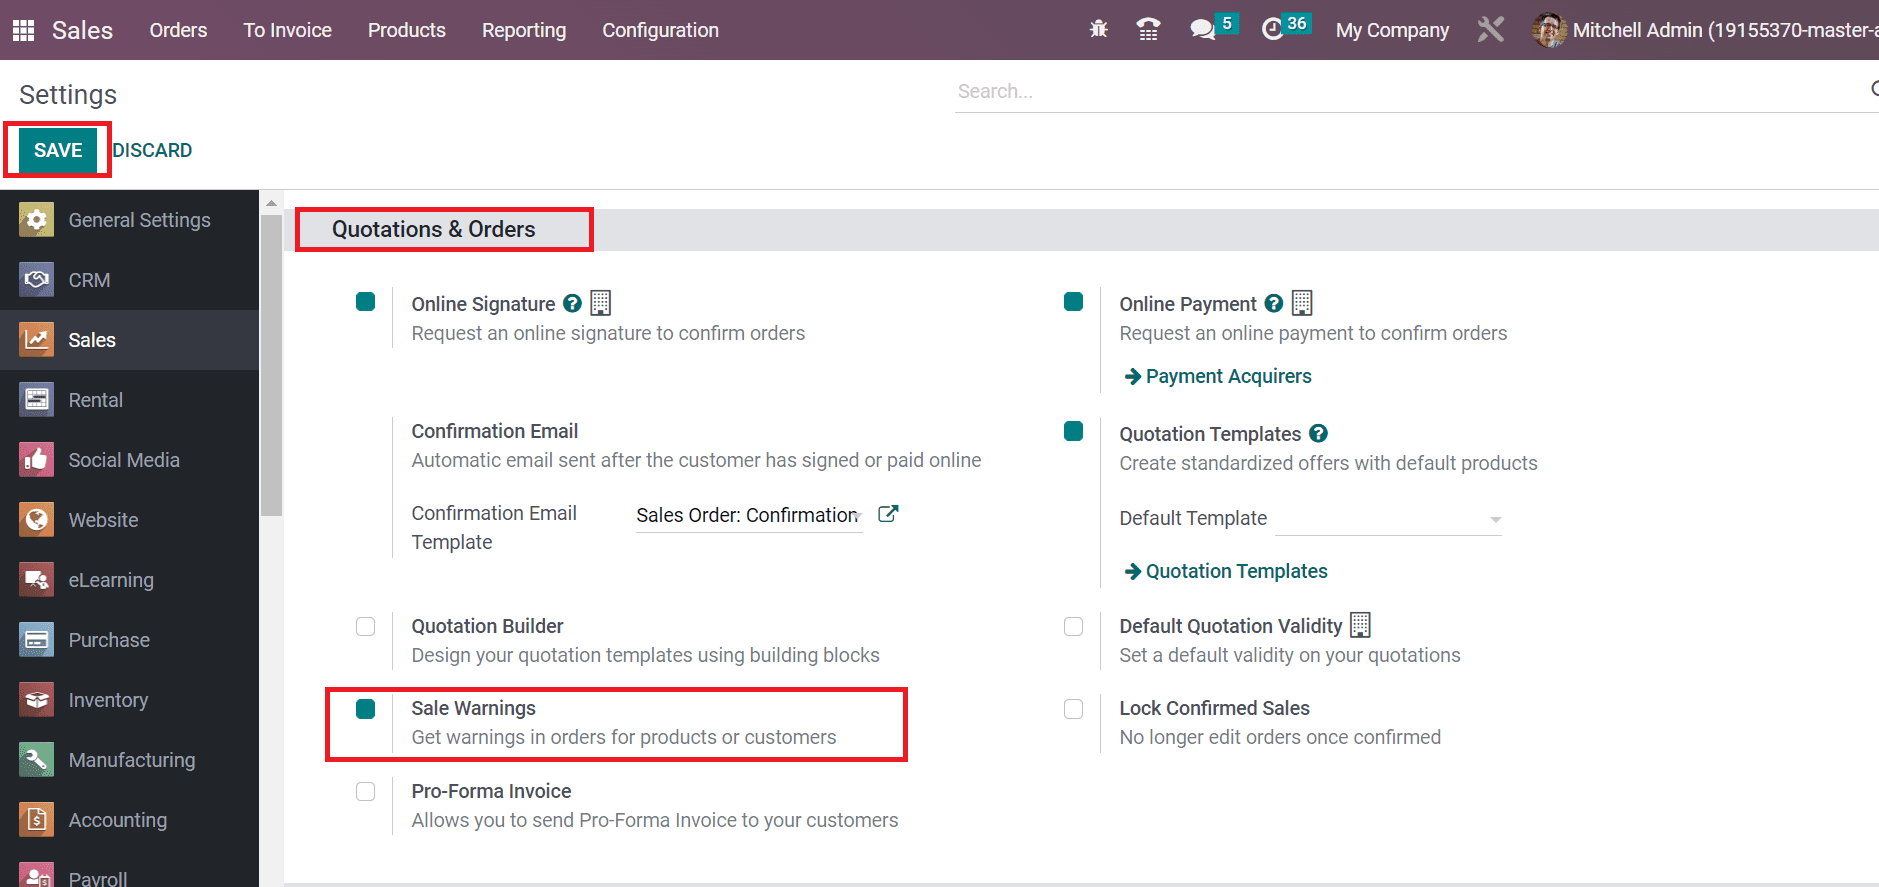 how-to-get-warnings-in-orders-for-products-or-customers-in-odoo-16-1